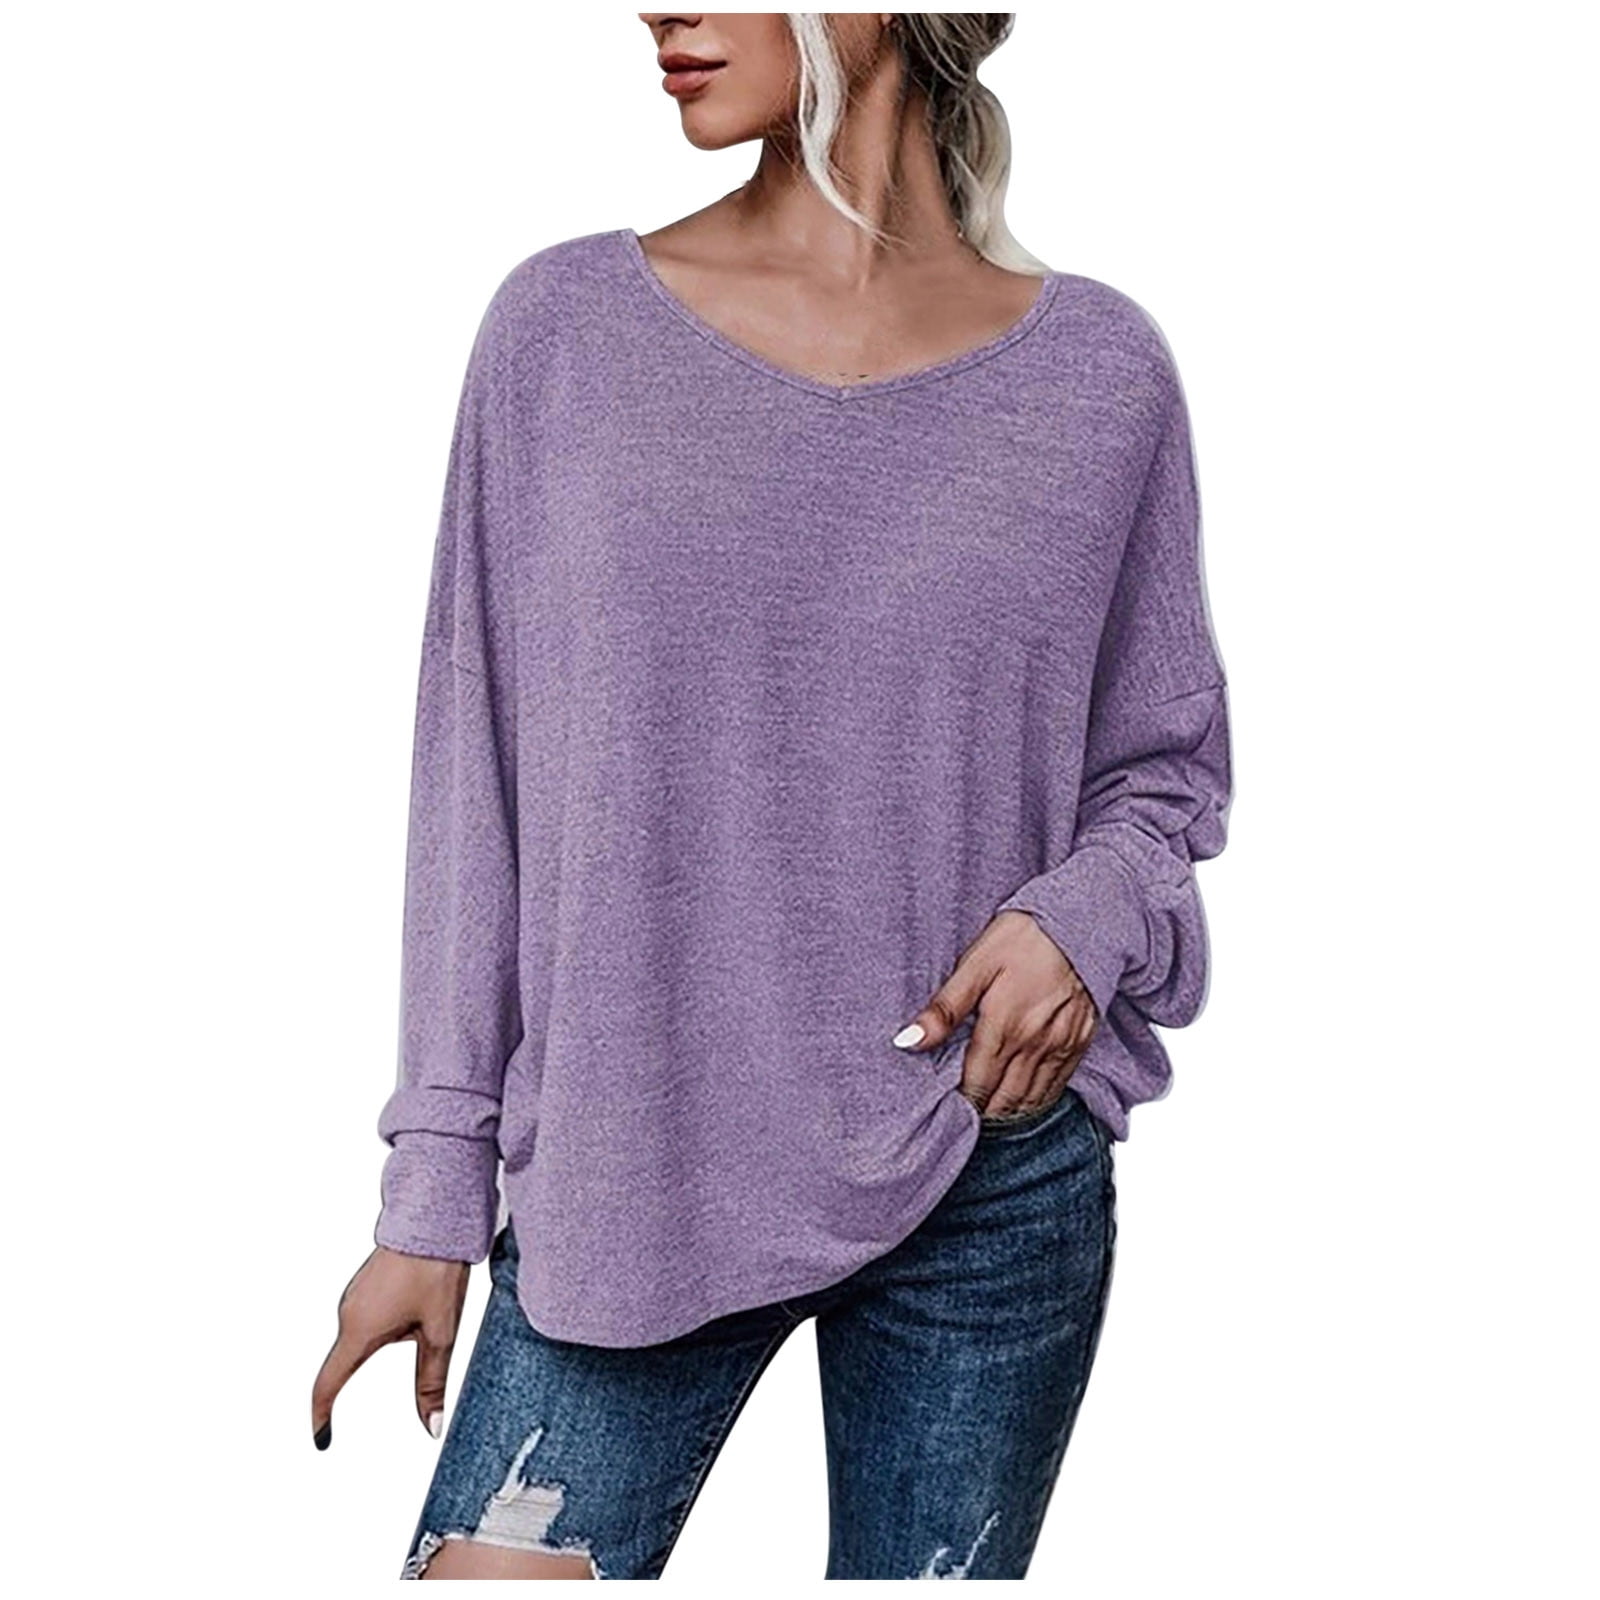 tklpehg Going Out Tops for Women Long Sleeve V-Neck Loose Fit